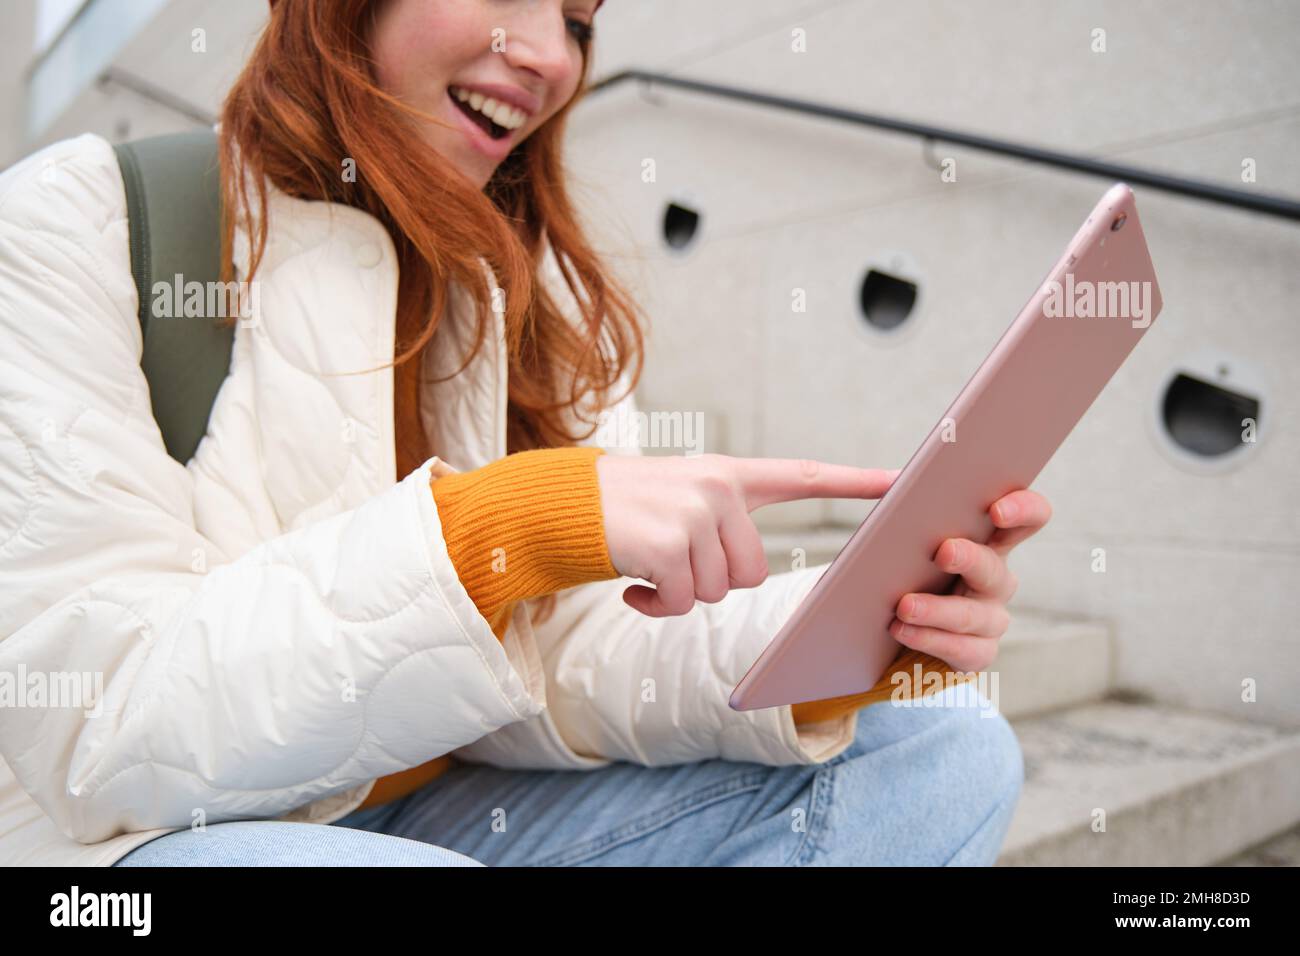 Young stylish girl, redhead female students sits on stairs outdoors with digital tablet, reads, uses social media app on gadget, plays games while Stock Photo